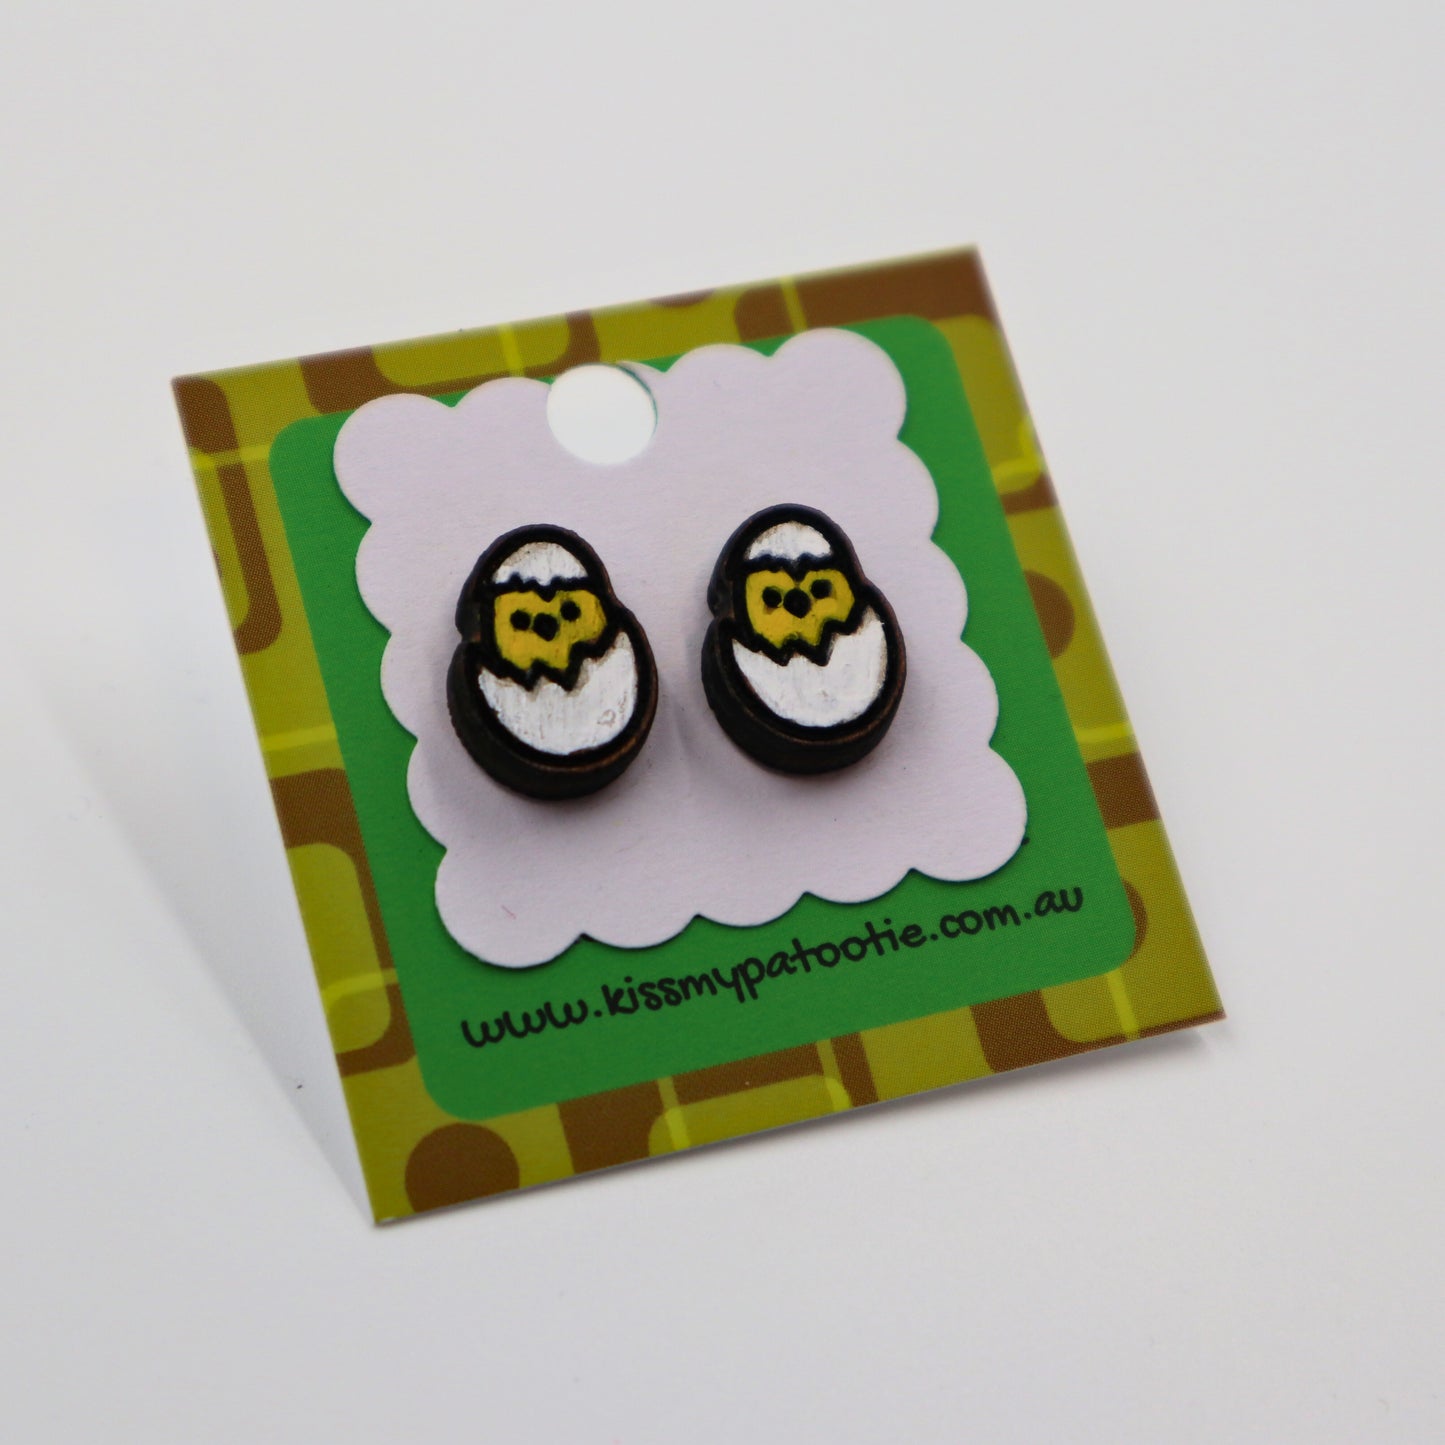 Hatching chick wooden earrings - hand painted